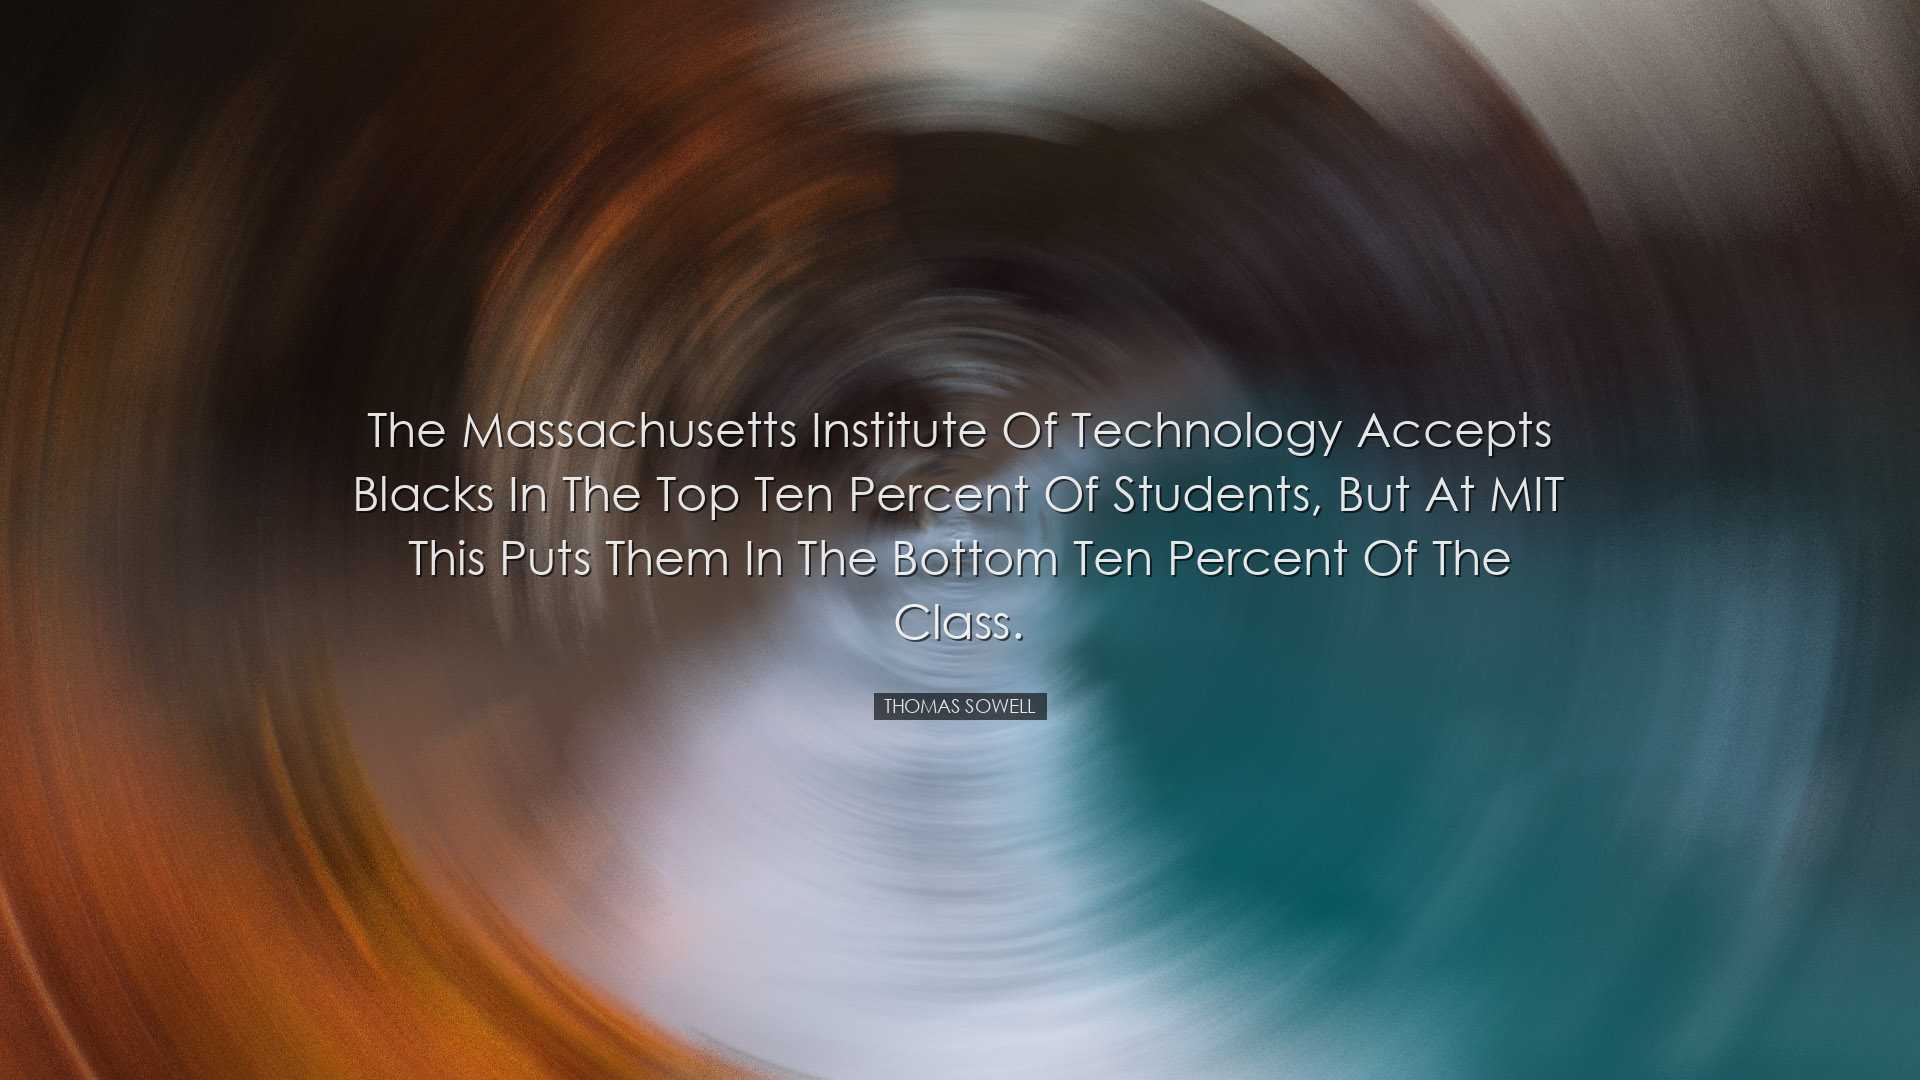 The Massachusetts Institute of Technology accepts blacks in the to